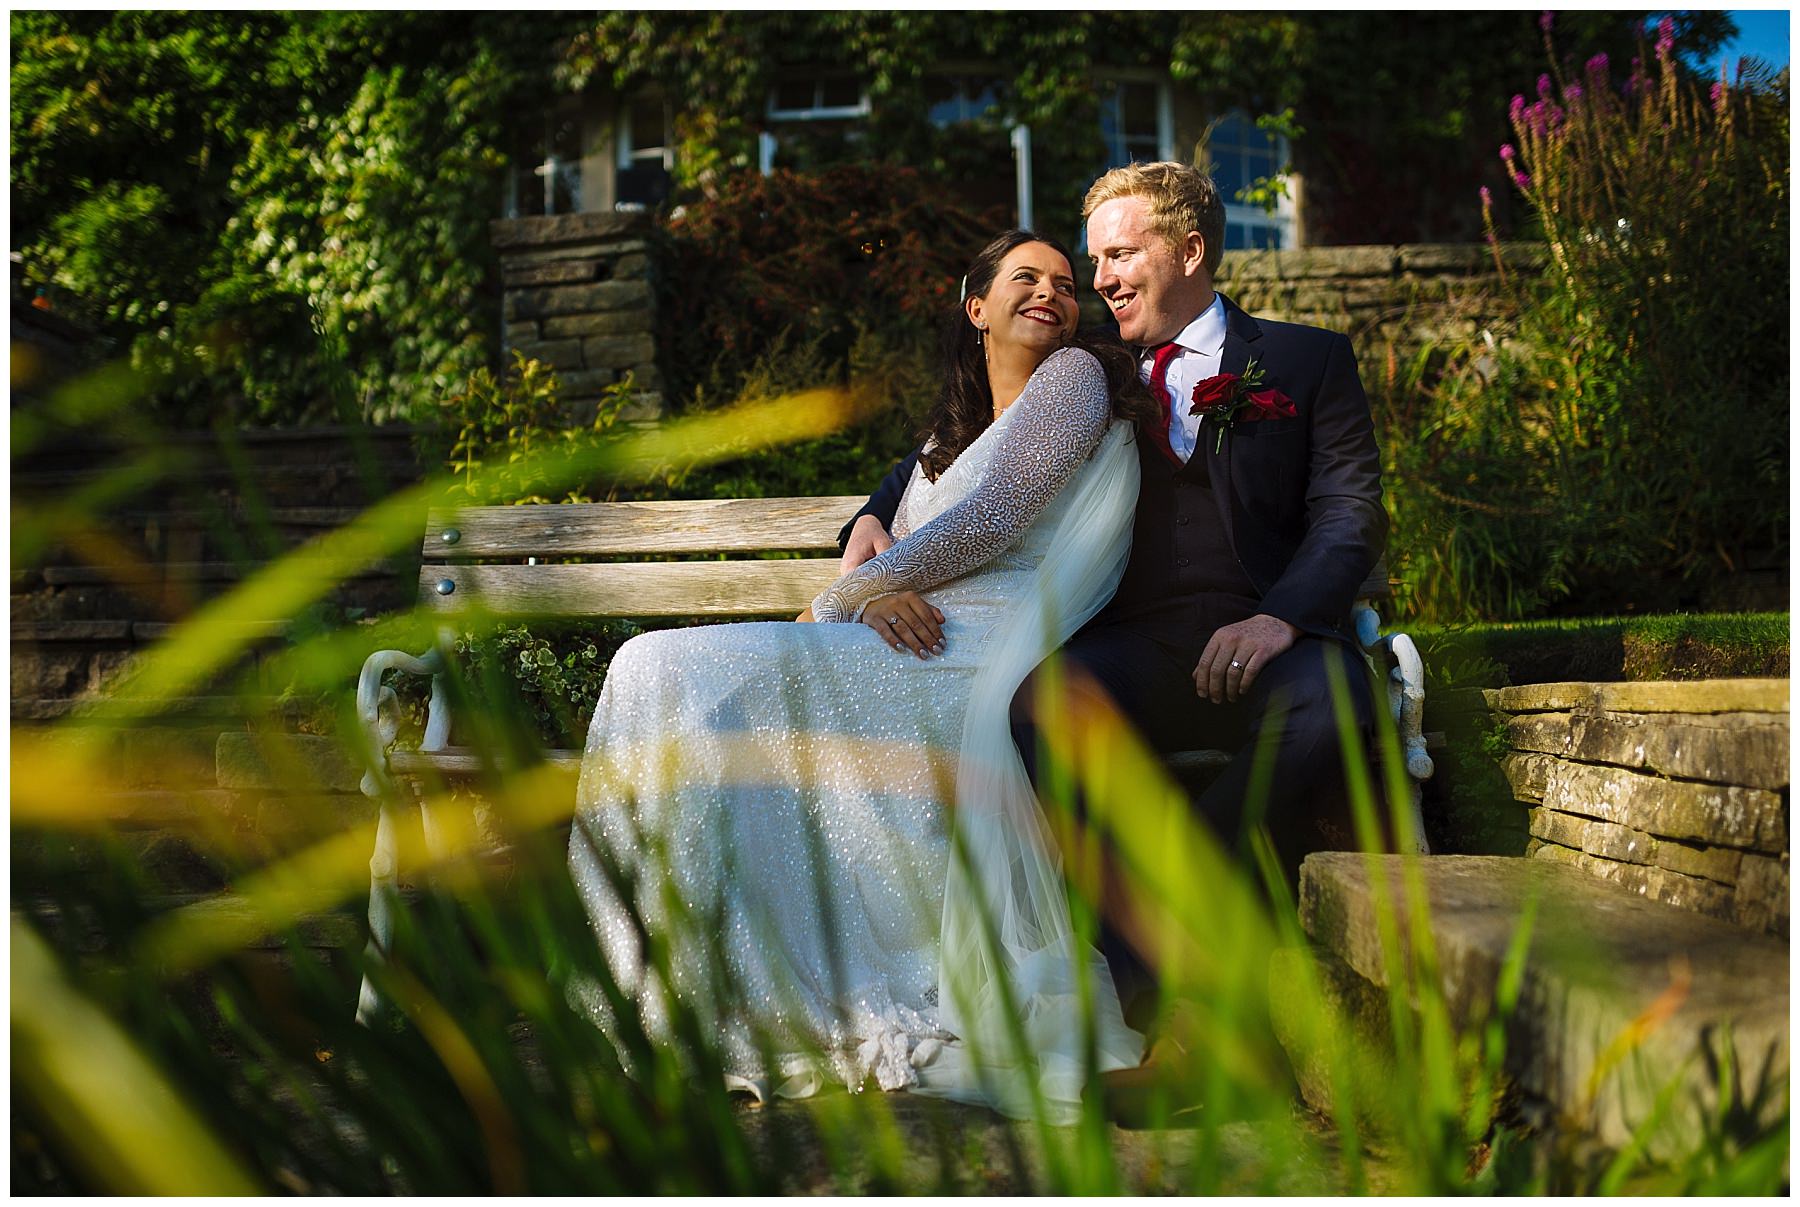 Wedding Portraits at Hilltop Country House